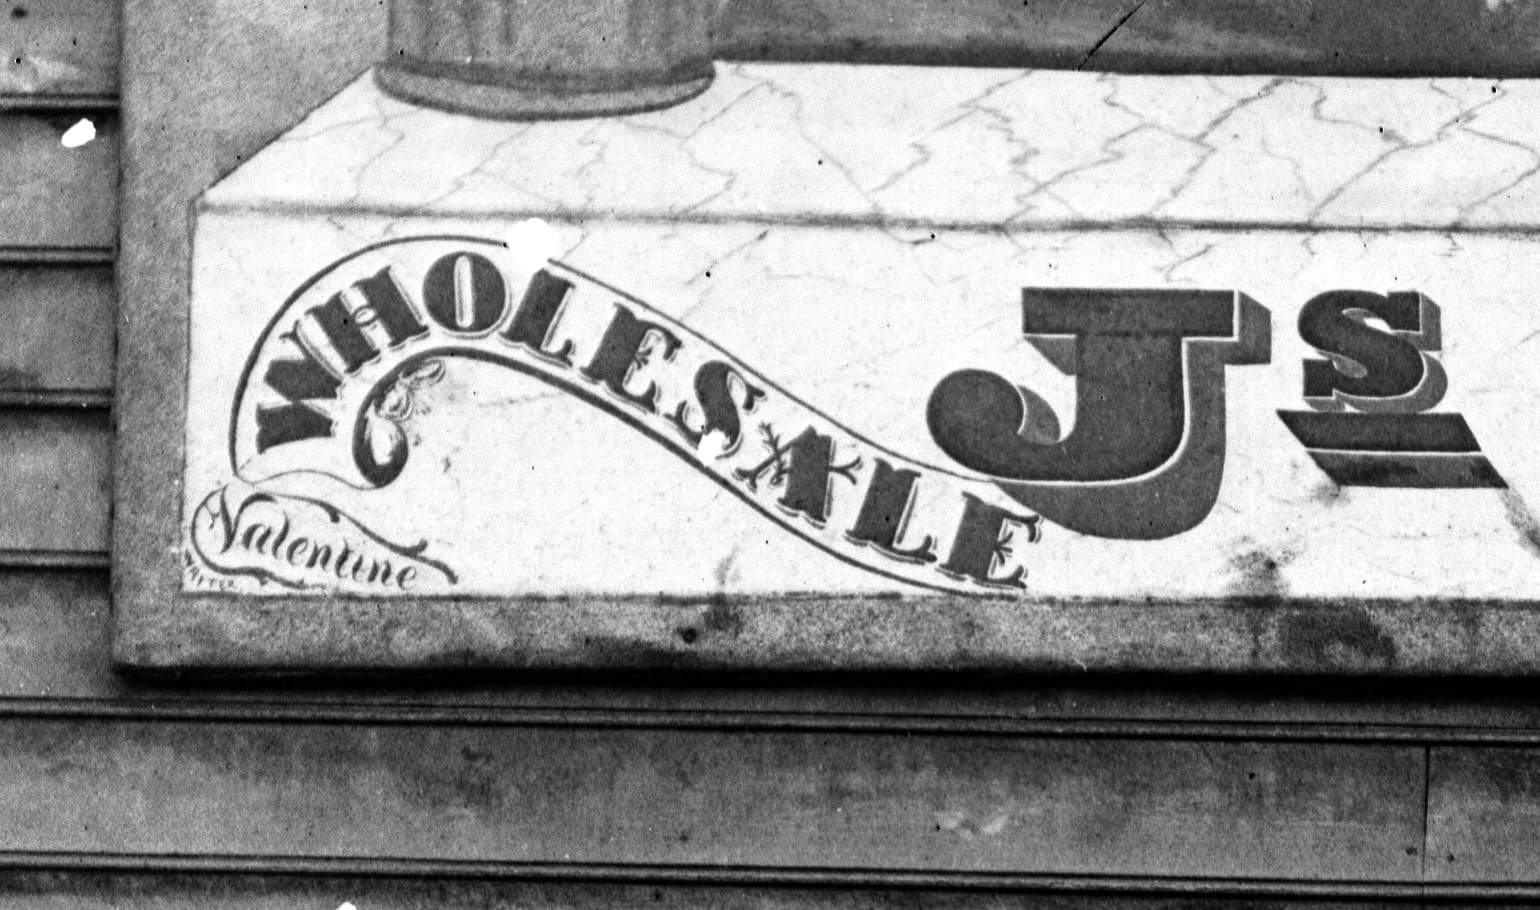 Corner of a mounted sign board showing a bit of the main letters ('Wholesale, Js') and the signature of the sign painter, Valentine bottom left.